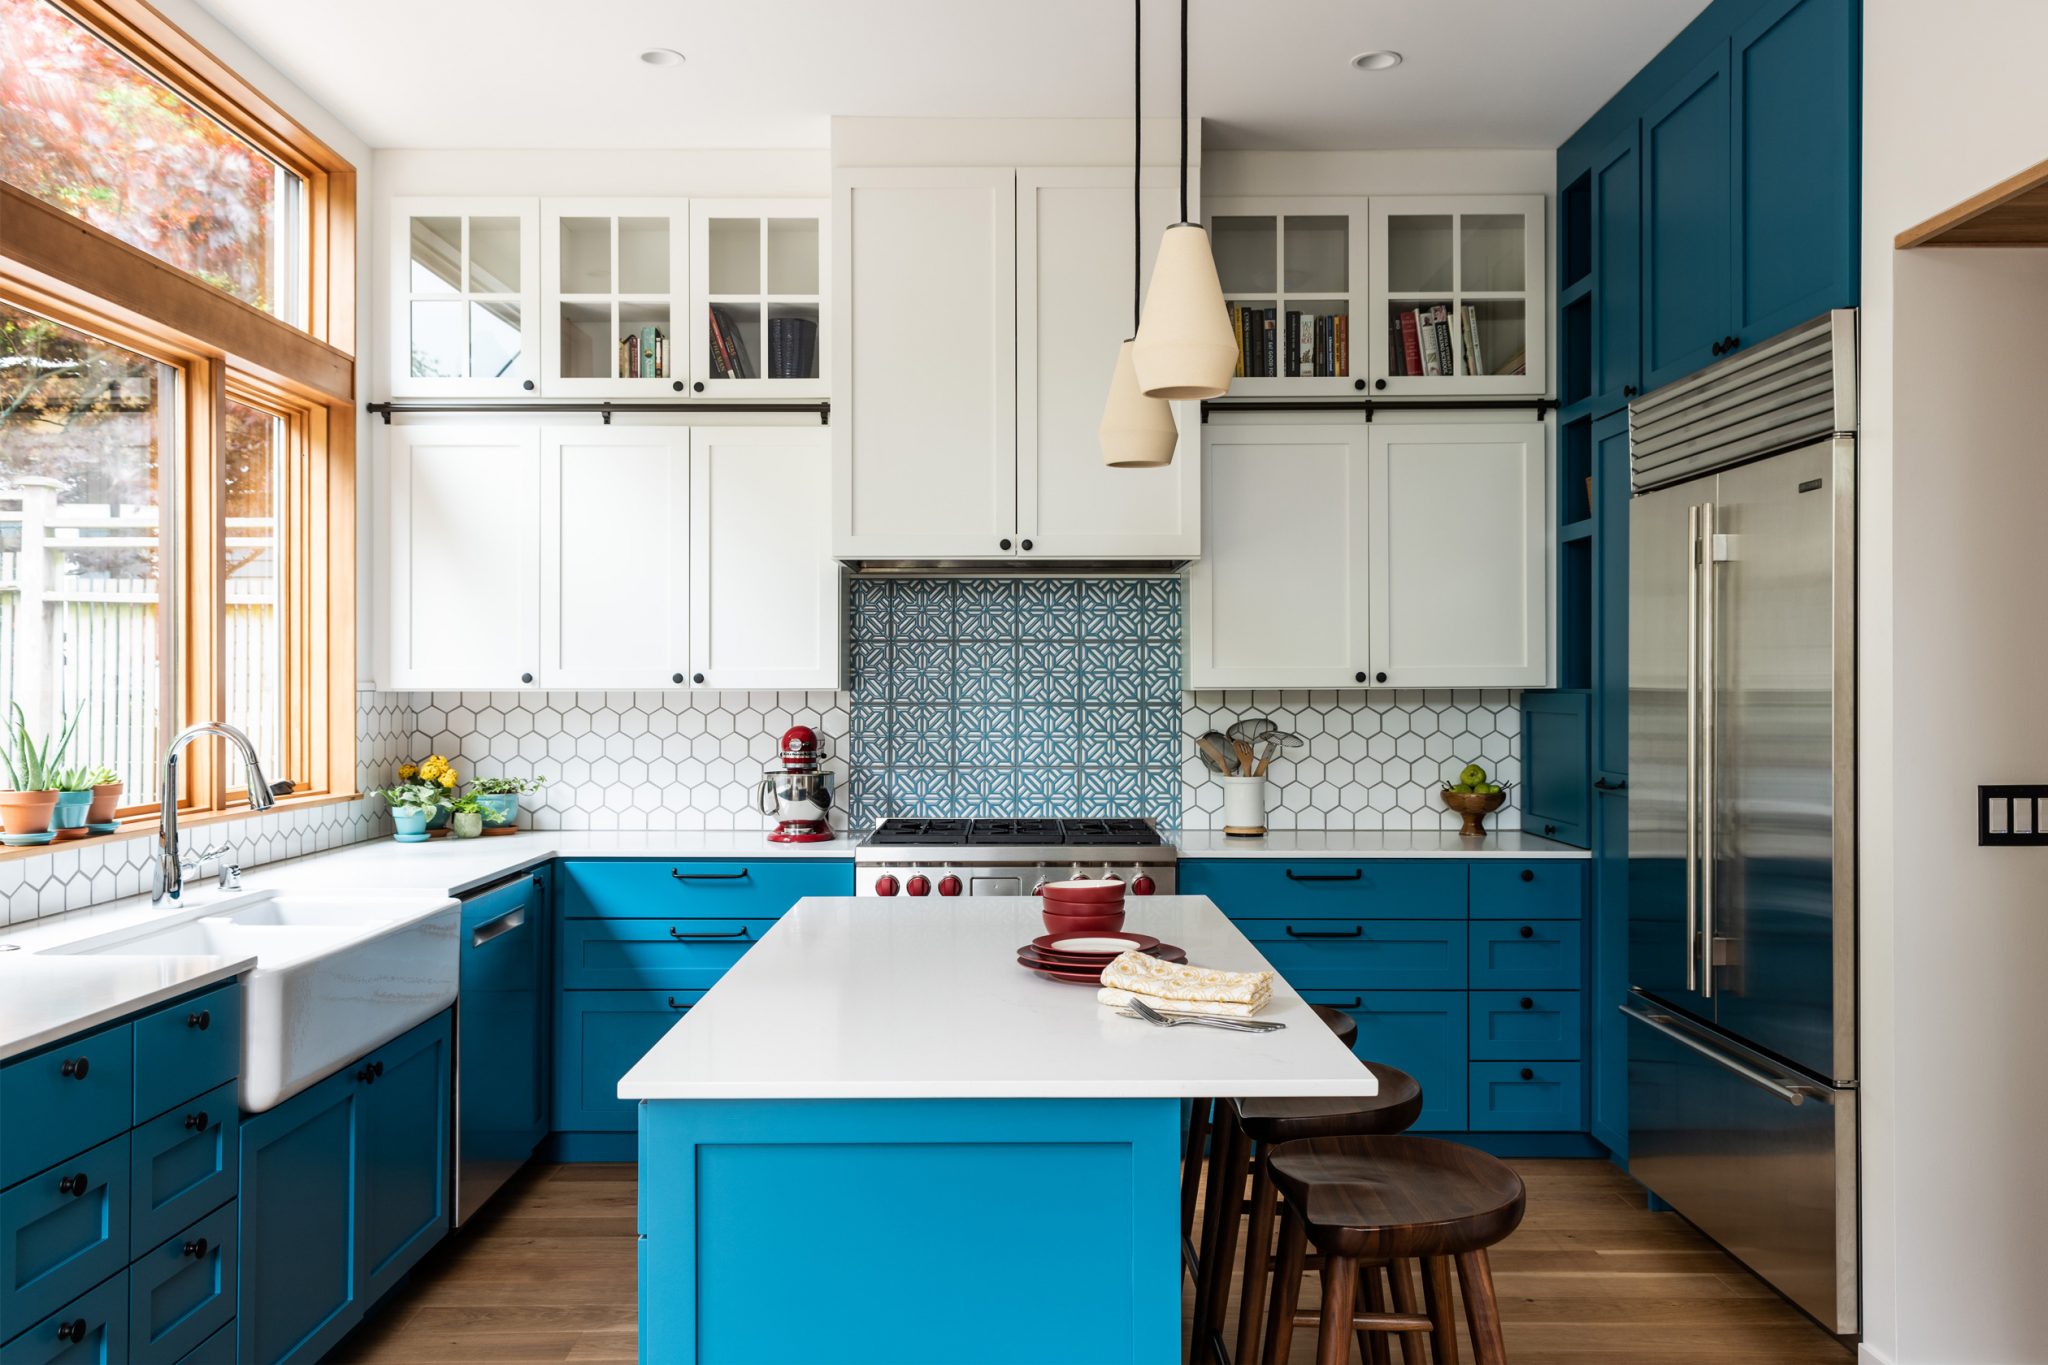 Creating a Color-Blocked Kitchen – Board & Vellum